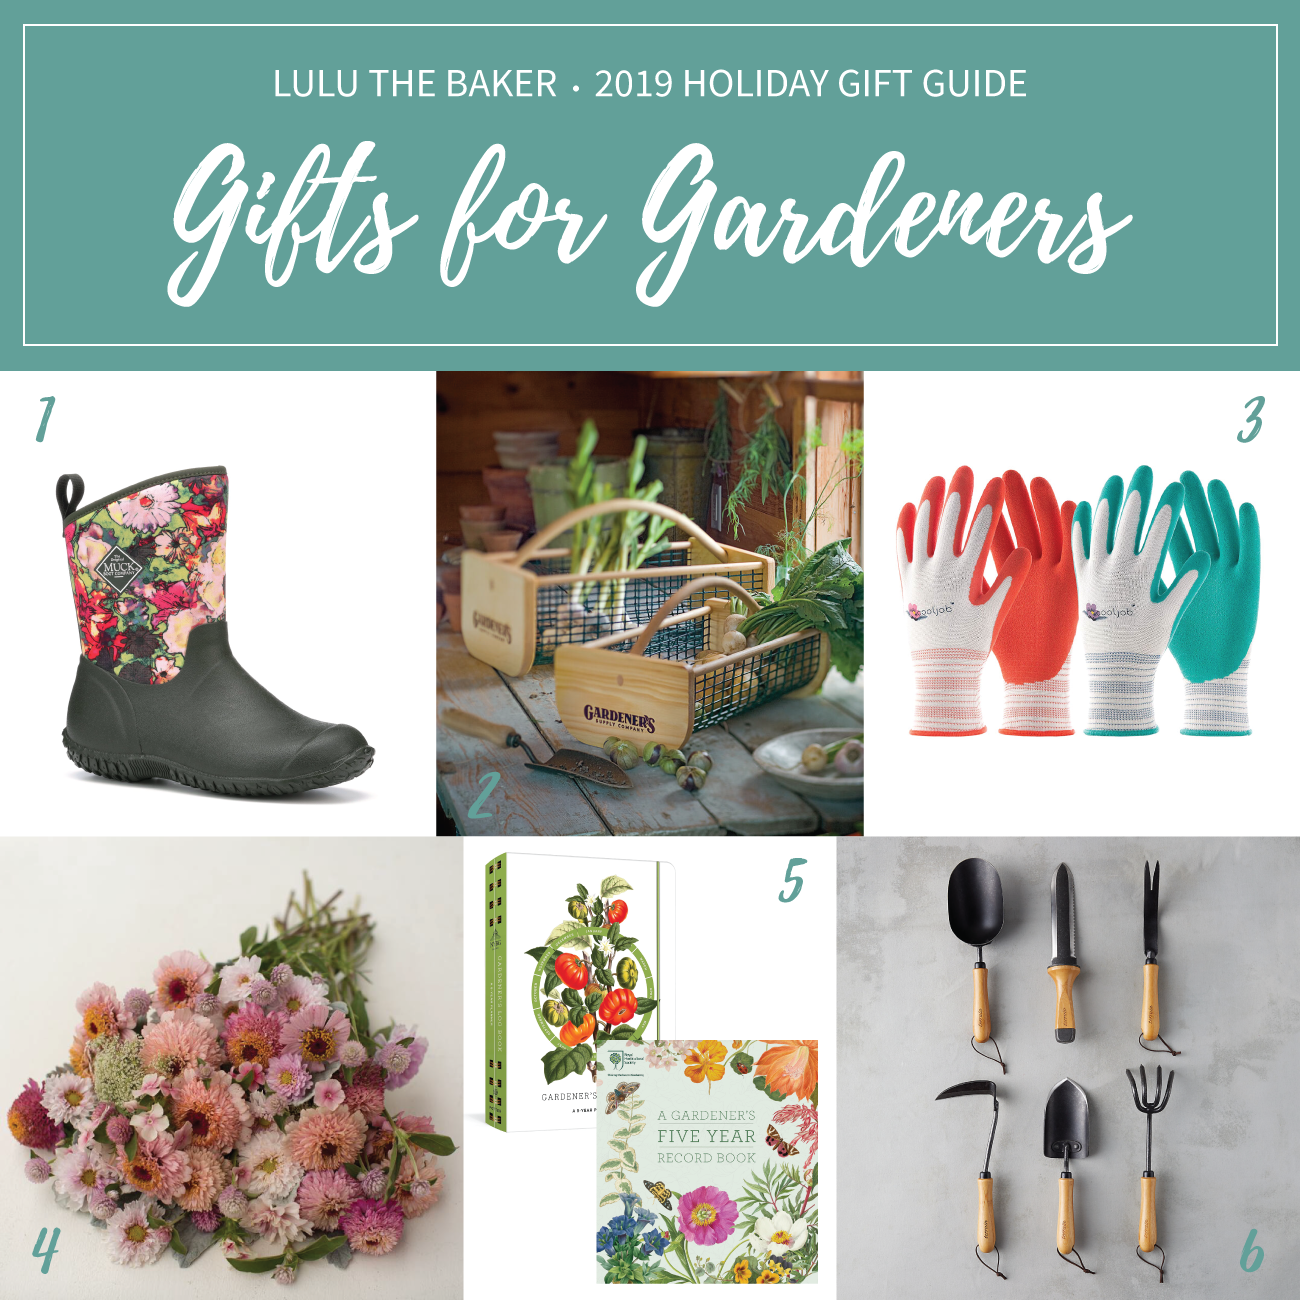 I've rounded up some of my must-have gardening items in this "gifts for gardeners" gift guide.